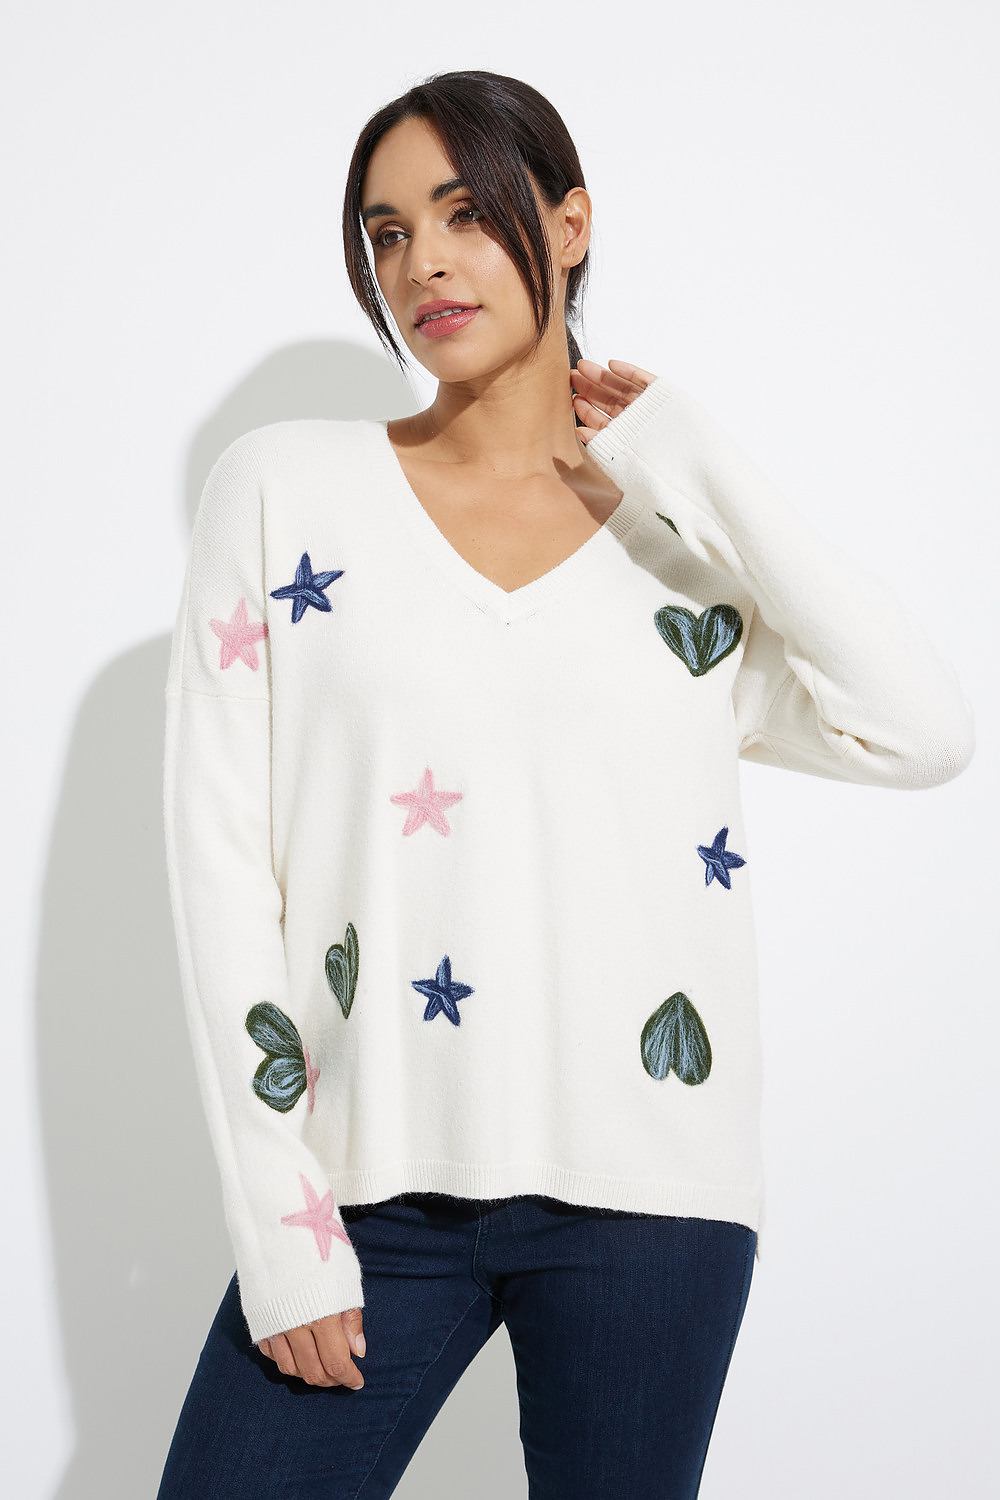 Hearts and Stars V-Neck Sweater Style C2333RR. Ecru